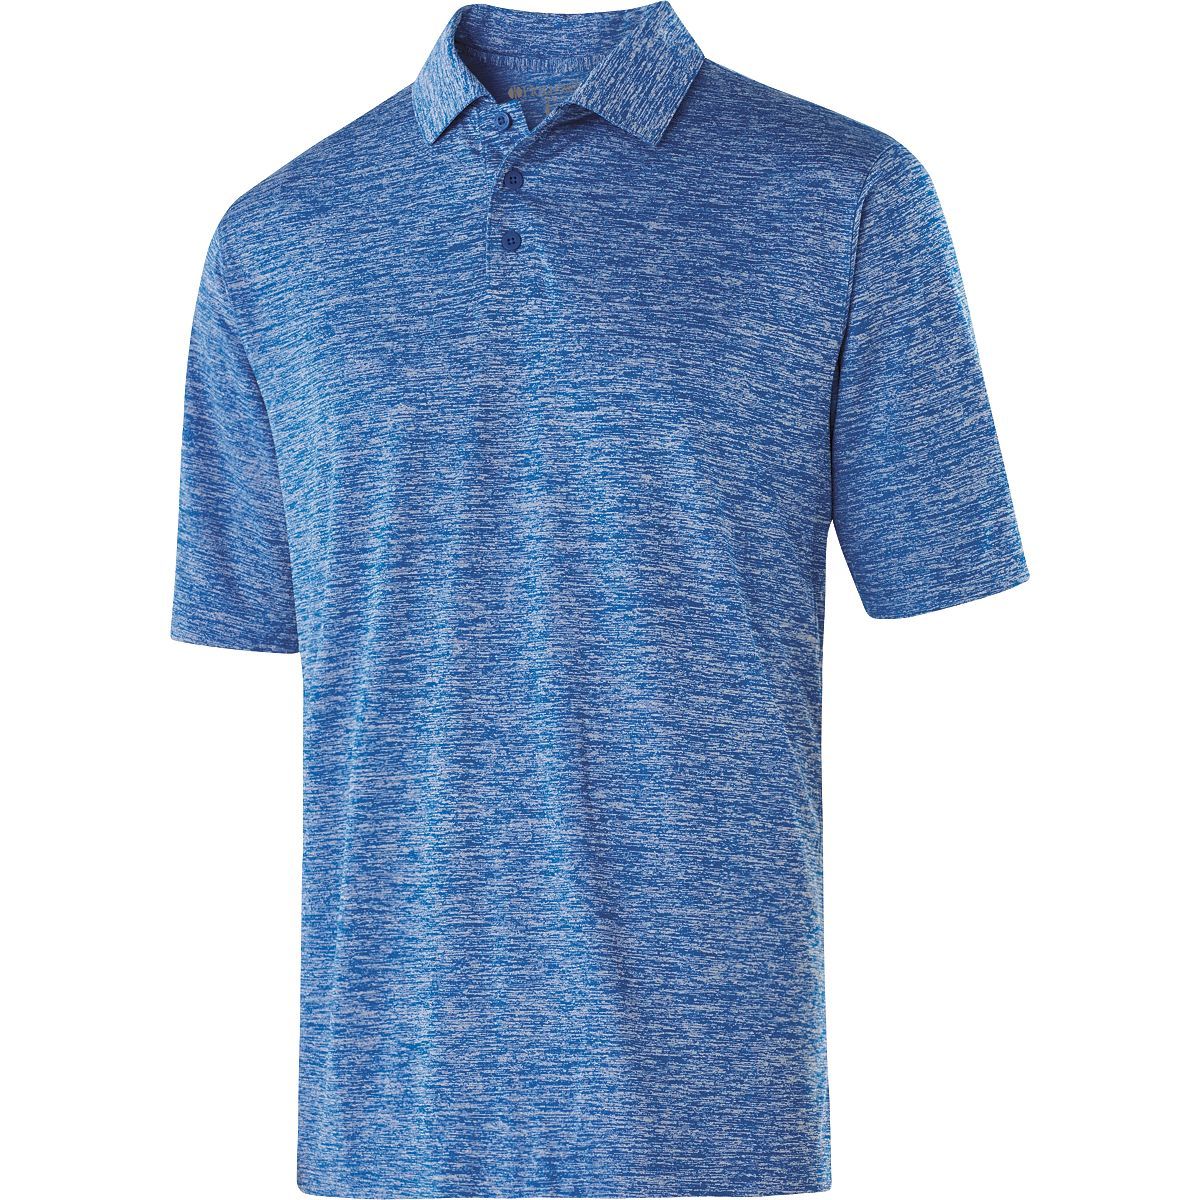 Holloway Electrify 2.0 Polo in Royal Heather  -Part of the Adult, Adult-Polos, Polos, Holloway, Shirts product lines at KanaleyCreations.com